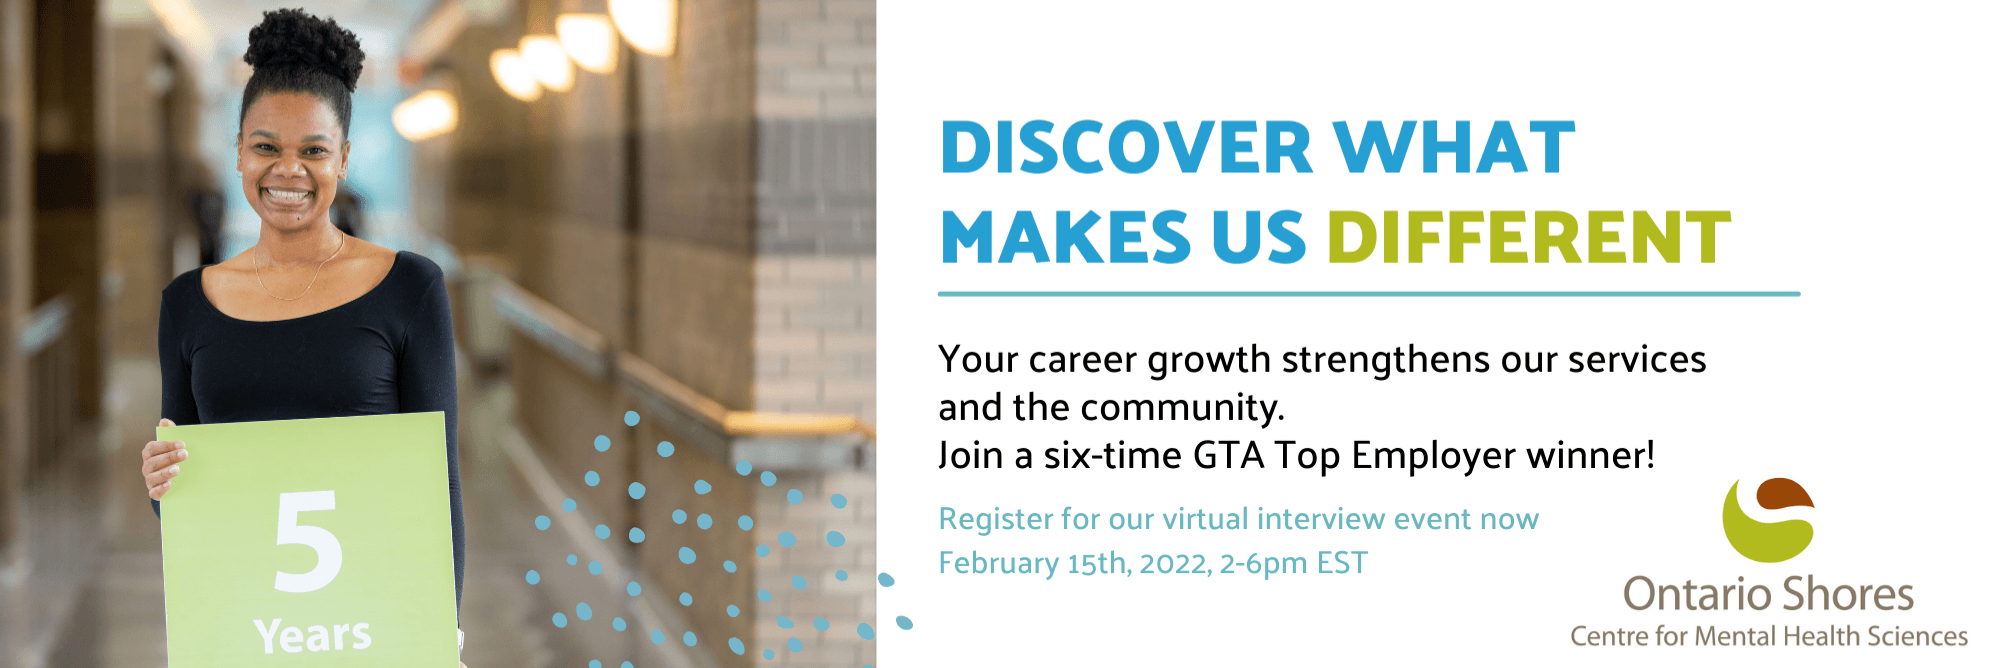 Ontario Shores - Where your career path and the mental health journey of the community meet.